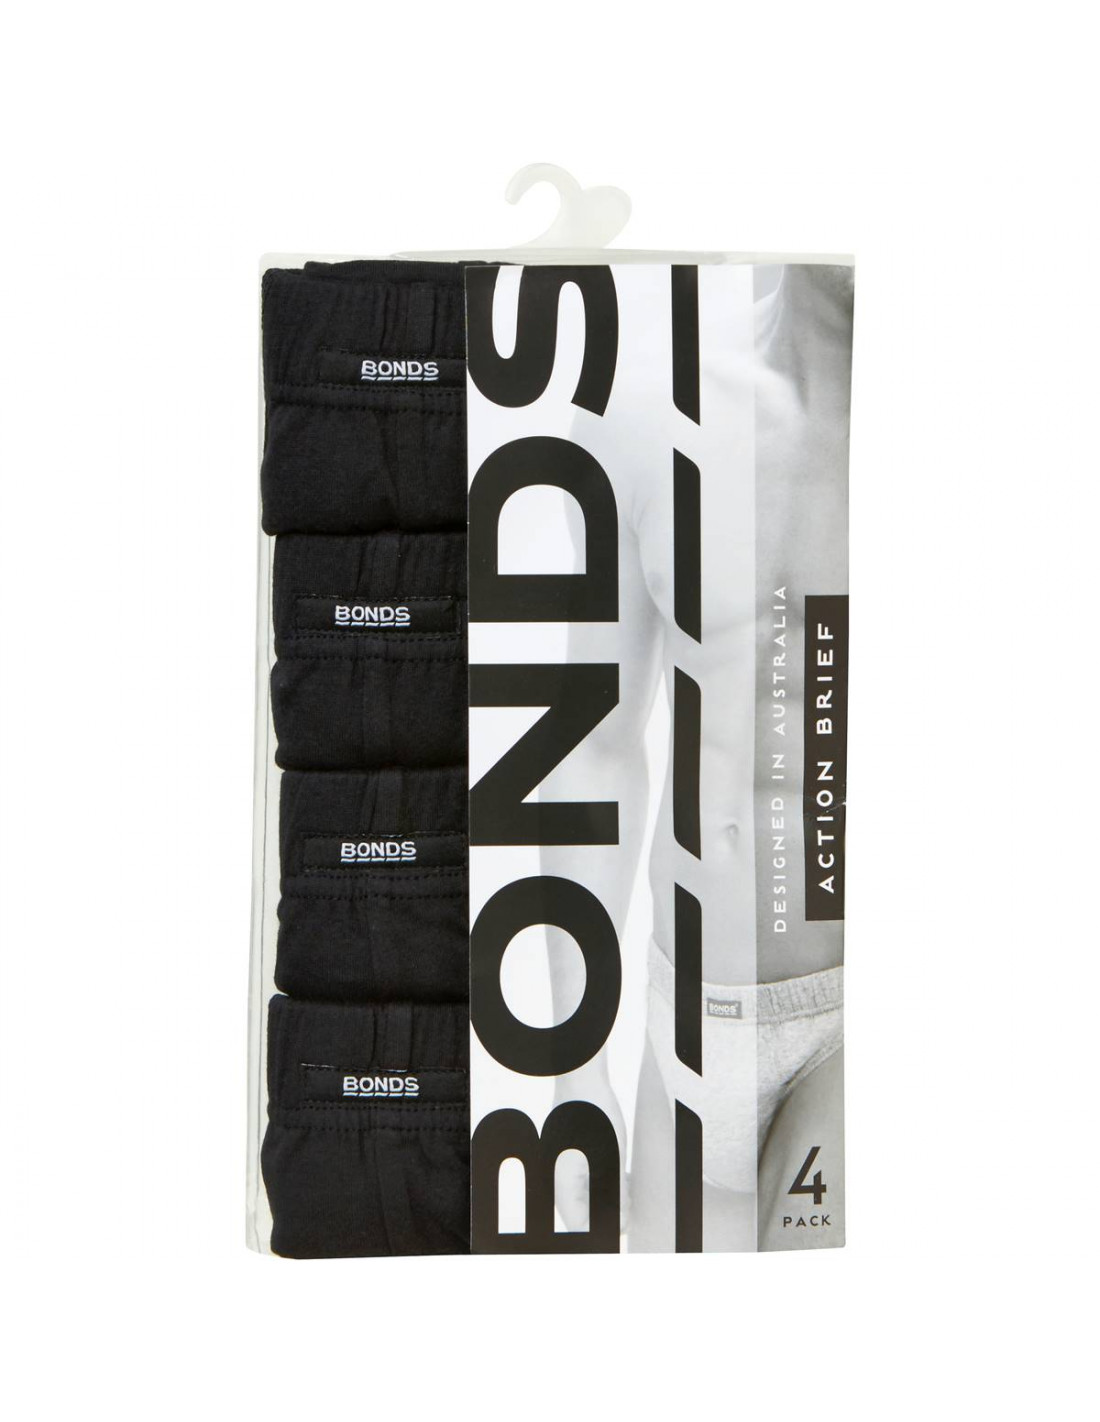 Bonds Action Brief Medium 4 pack | Ally's Basket - Direct from Aust...